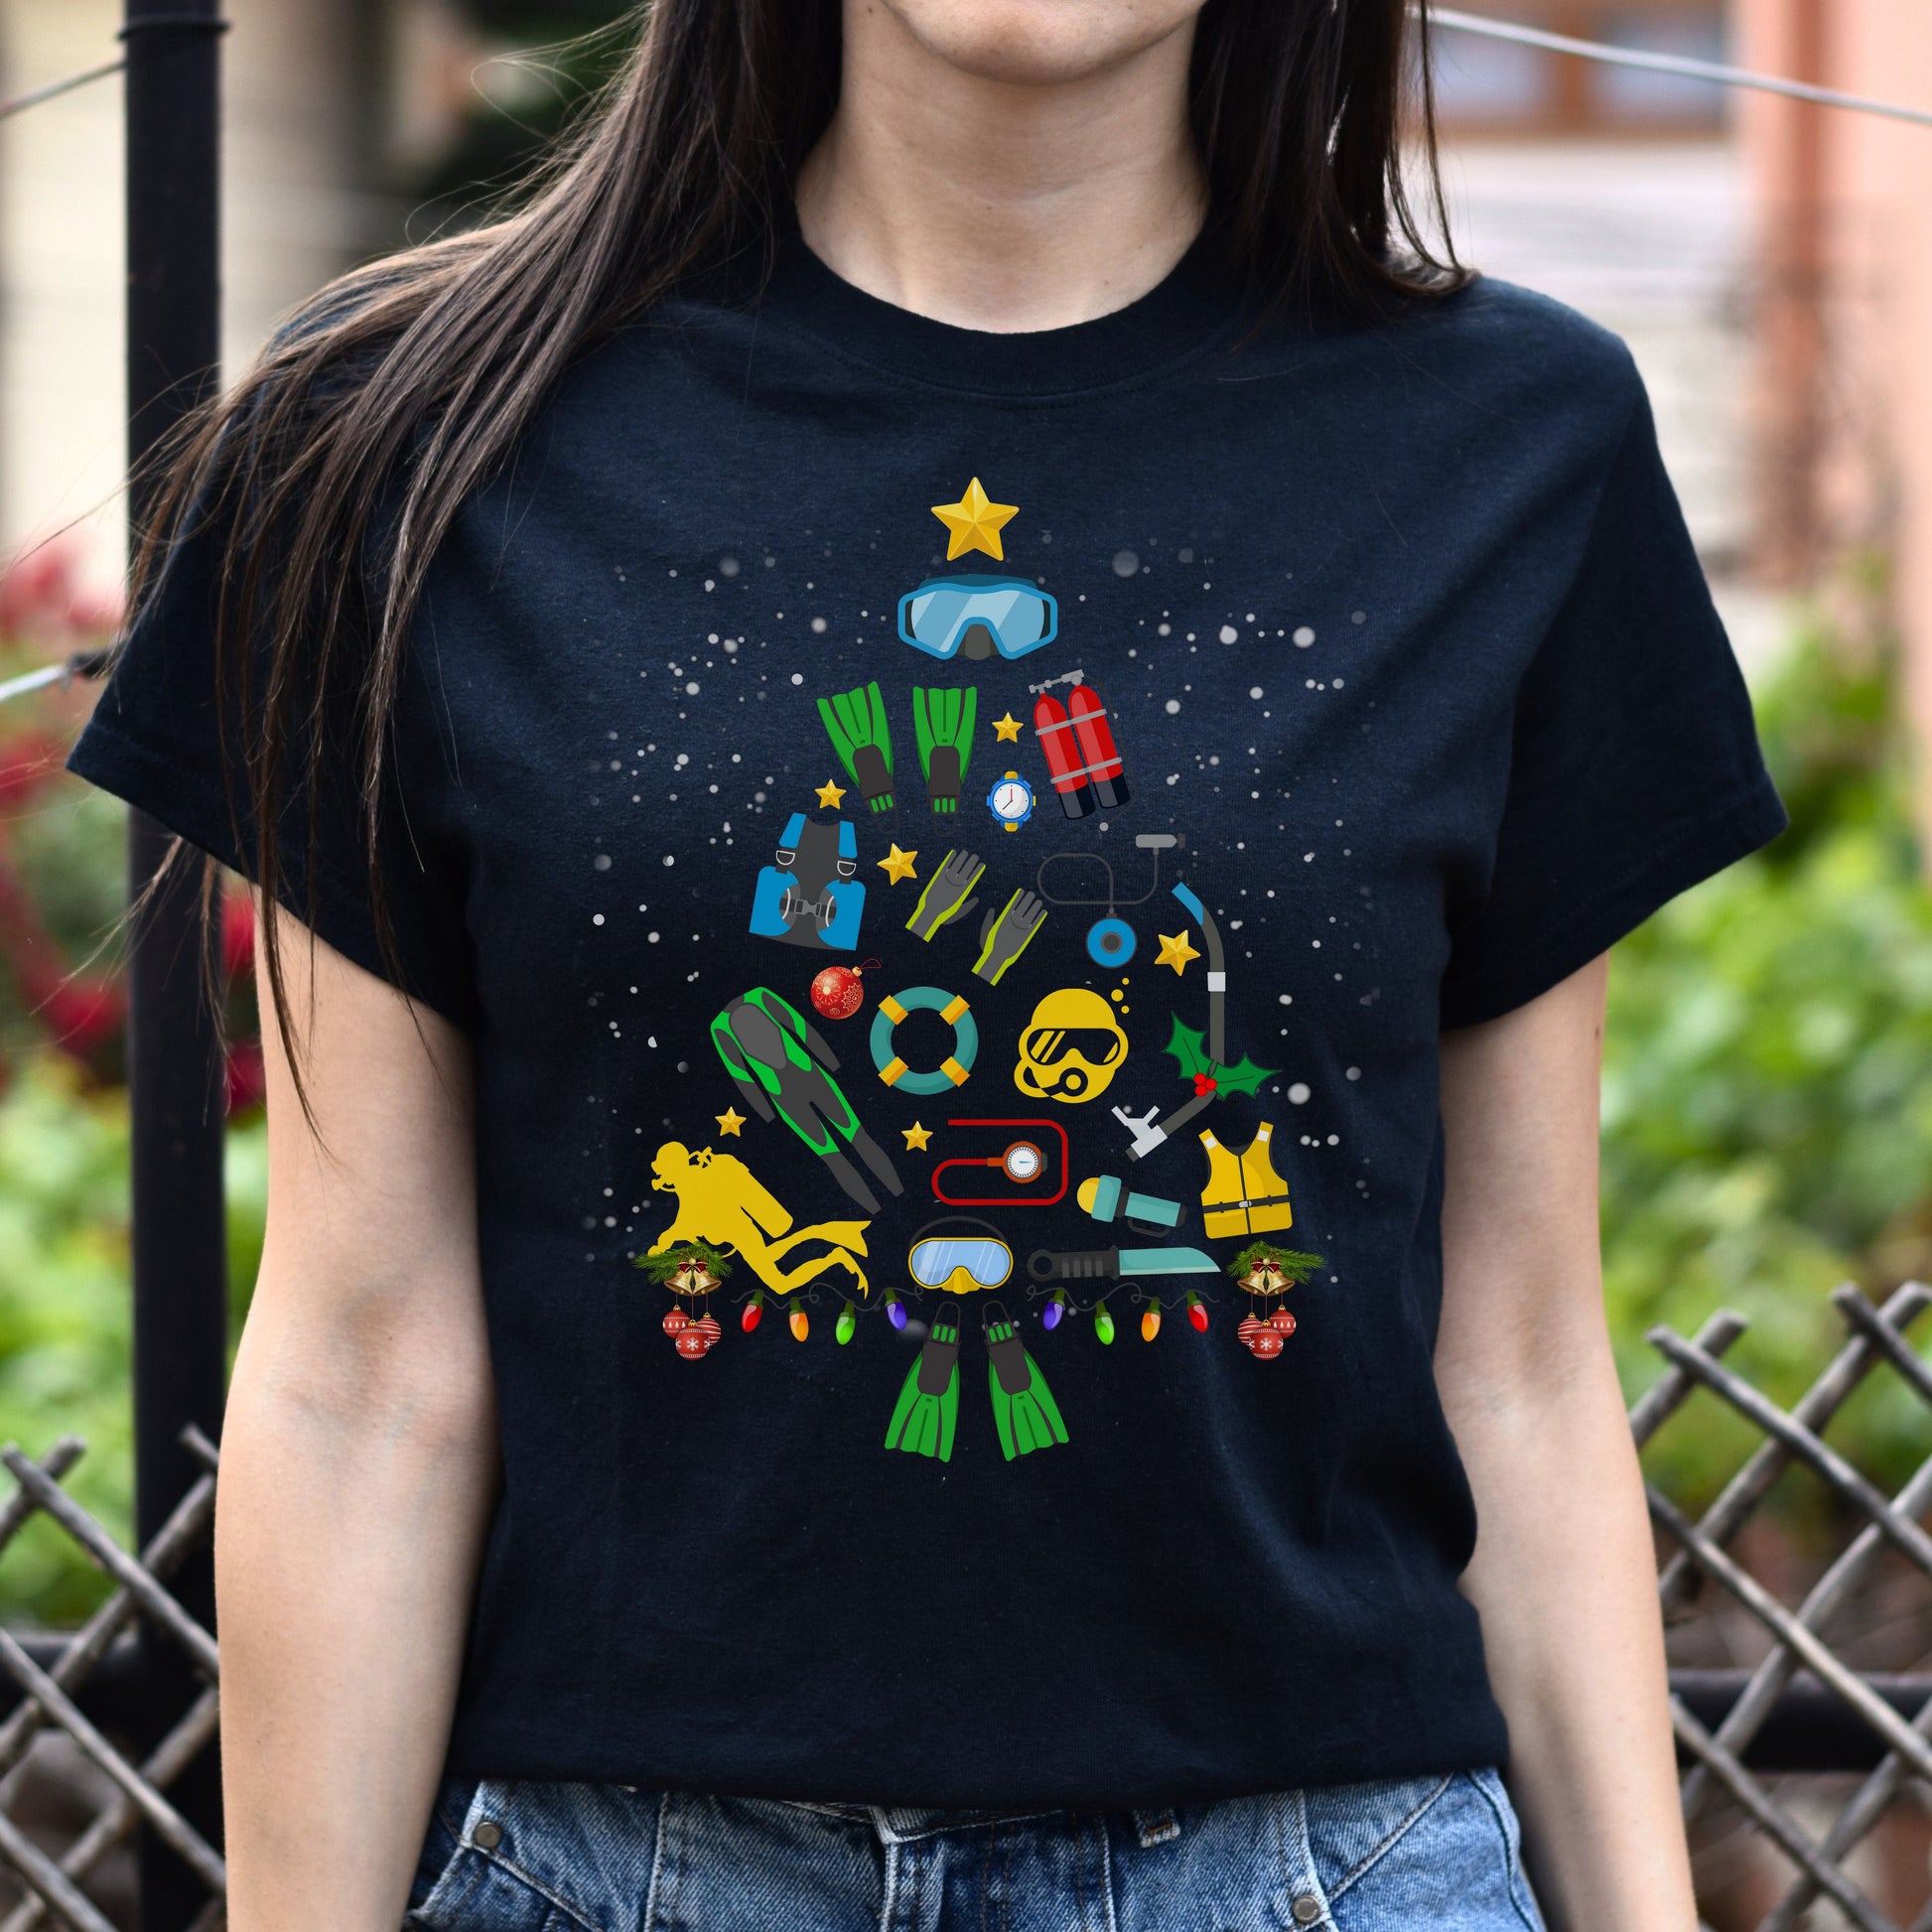 Diver Christmas tree Unisex shirt diving Holiday tee Black Dark Heather-Family-Gift-Planet